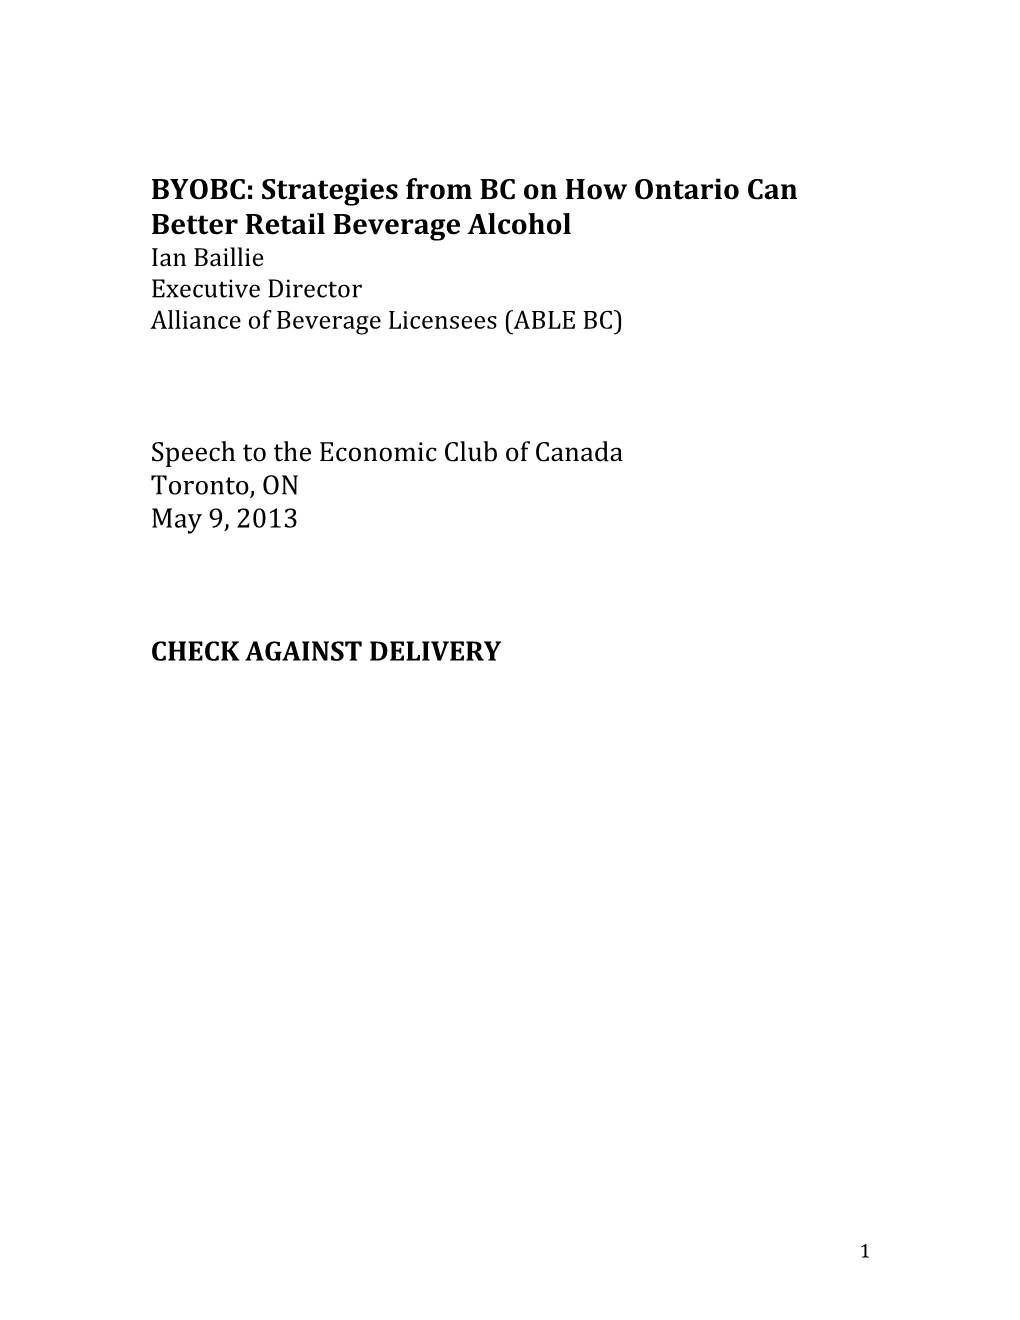 Strategies from BC on How Ontario Can Better Retail Beverage Alcohol Ian Baillie Executive Director Alliance of Beverage Licensees (ABLE BC)